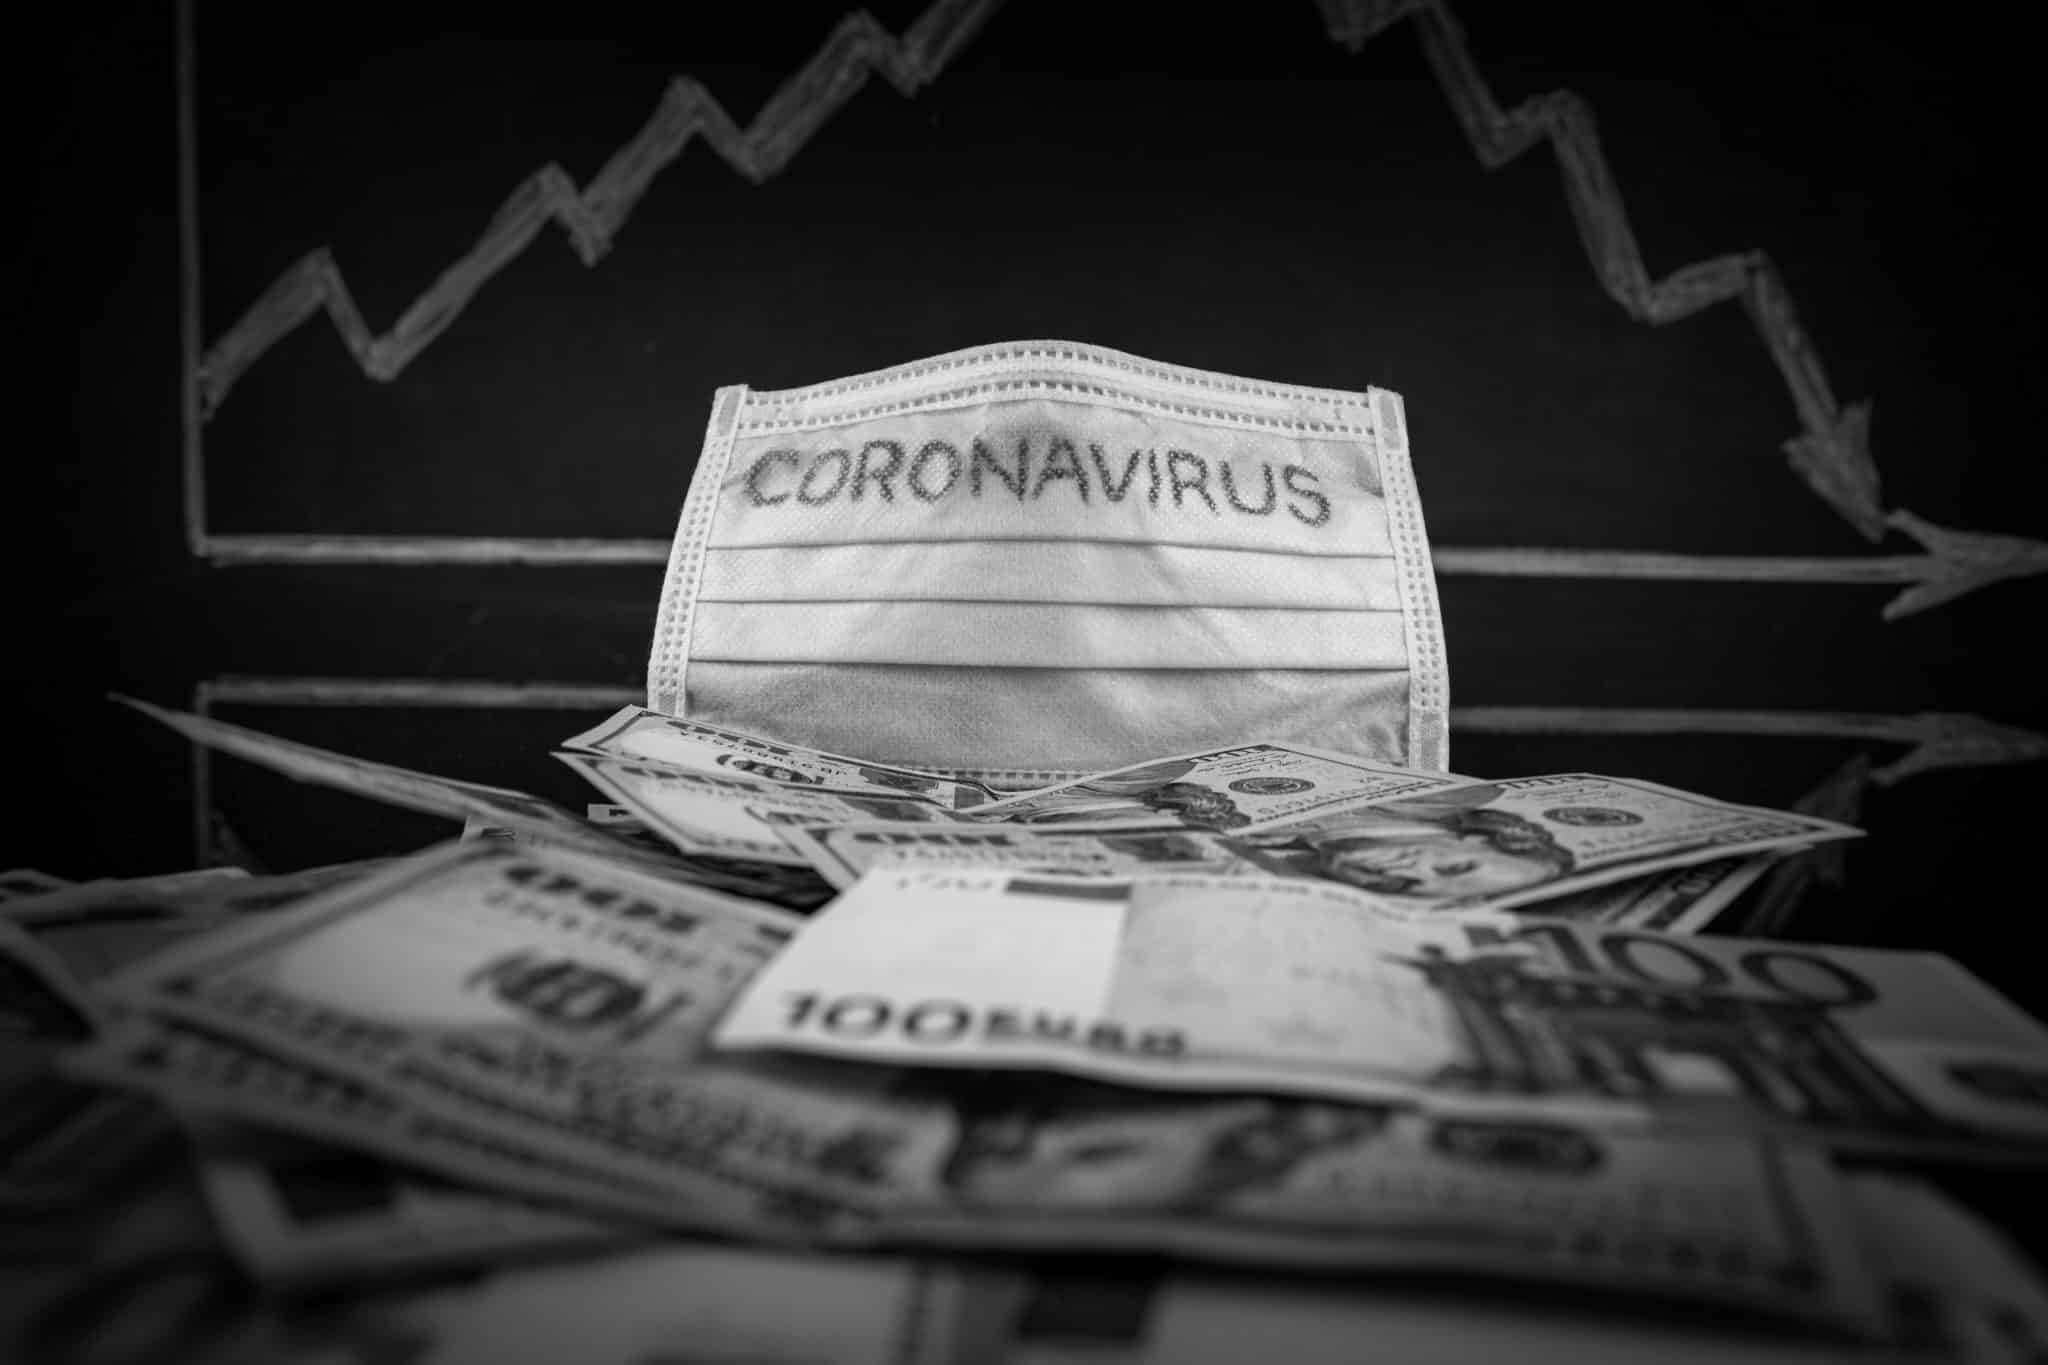 FinanceBrokerage - Economic News:  Coronavirus pandemic could cascade from a health catastrophe to a financial crisis.